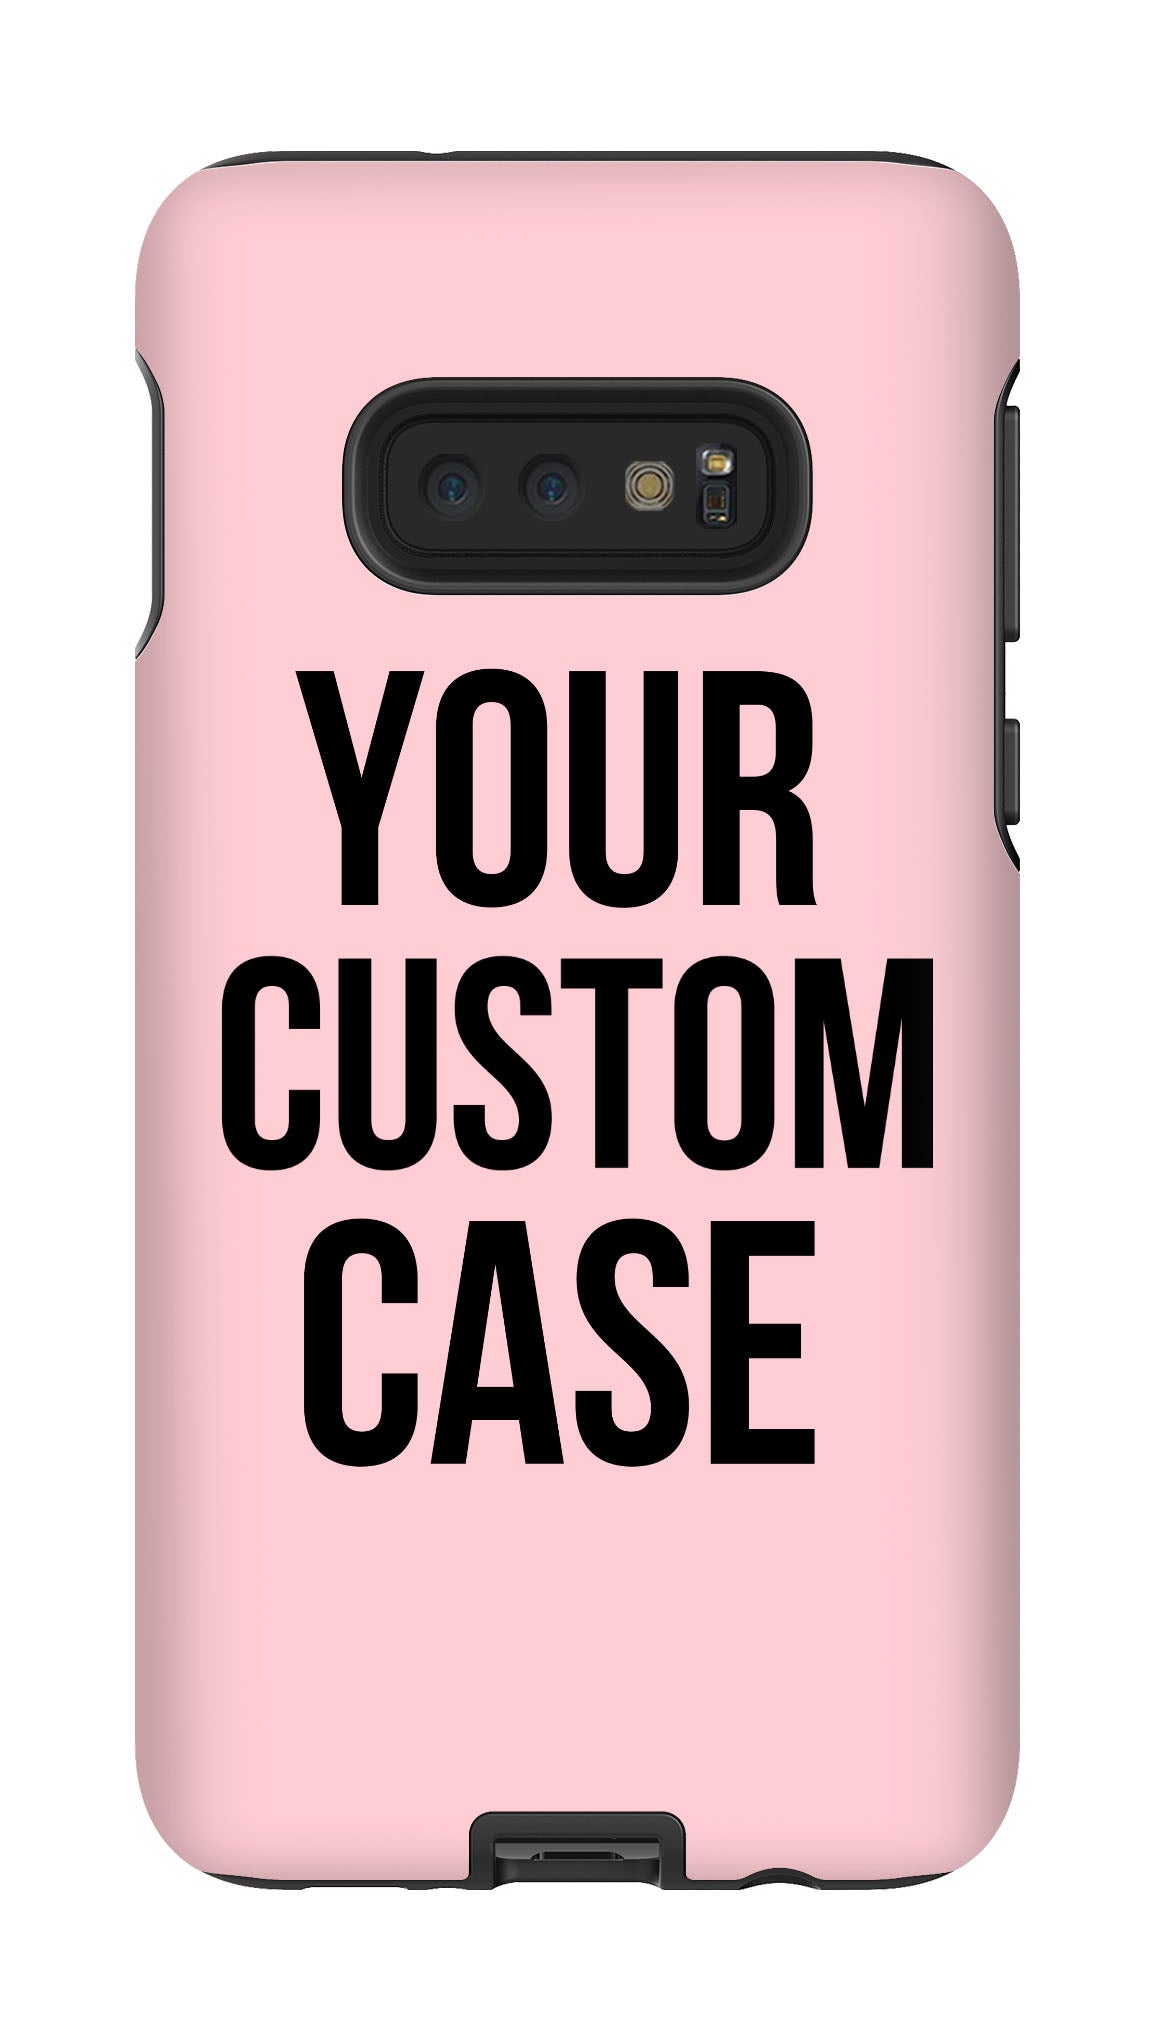 Custom Galaxy S10E Extra Protective Bumper Case - Your Custom Design in Cart will be Shipped - Pixly Case